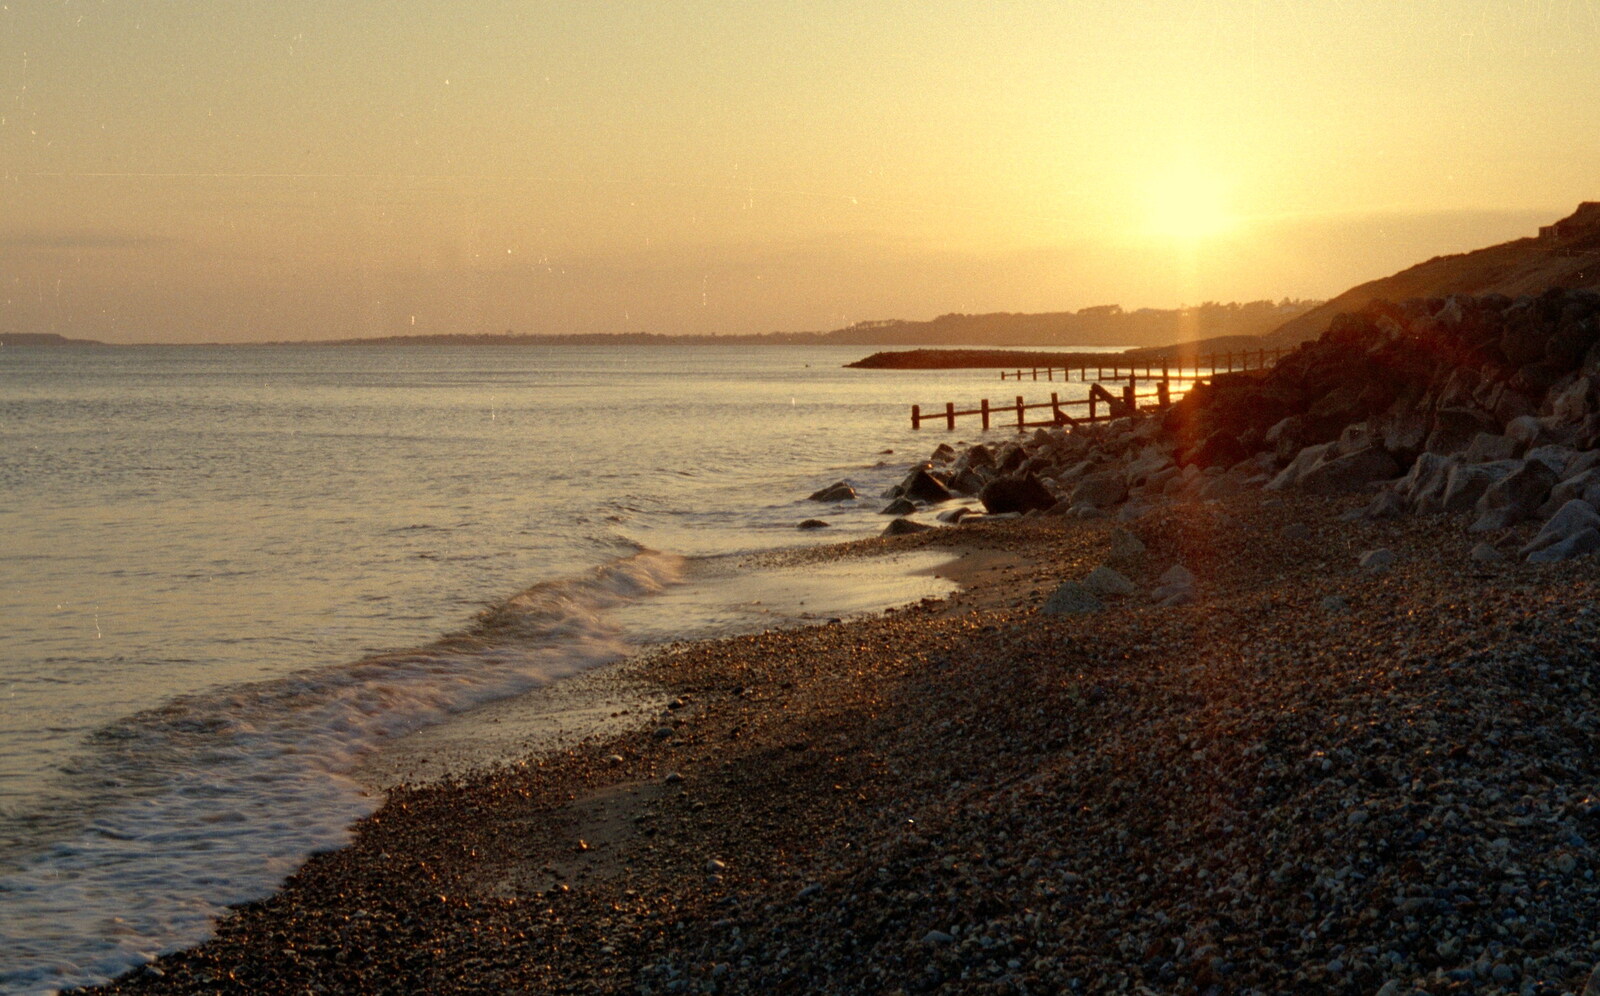 Nice sunset on Barton beach from A CB Reunion and a Trip to the Beach, Barton on Sea, Hampshire - 4th April 1986